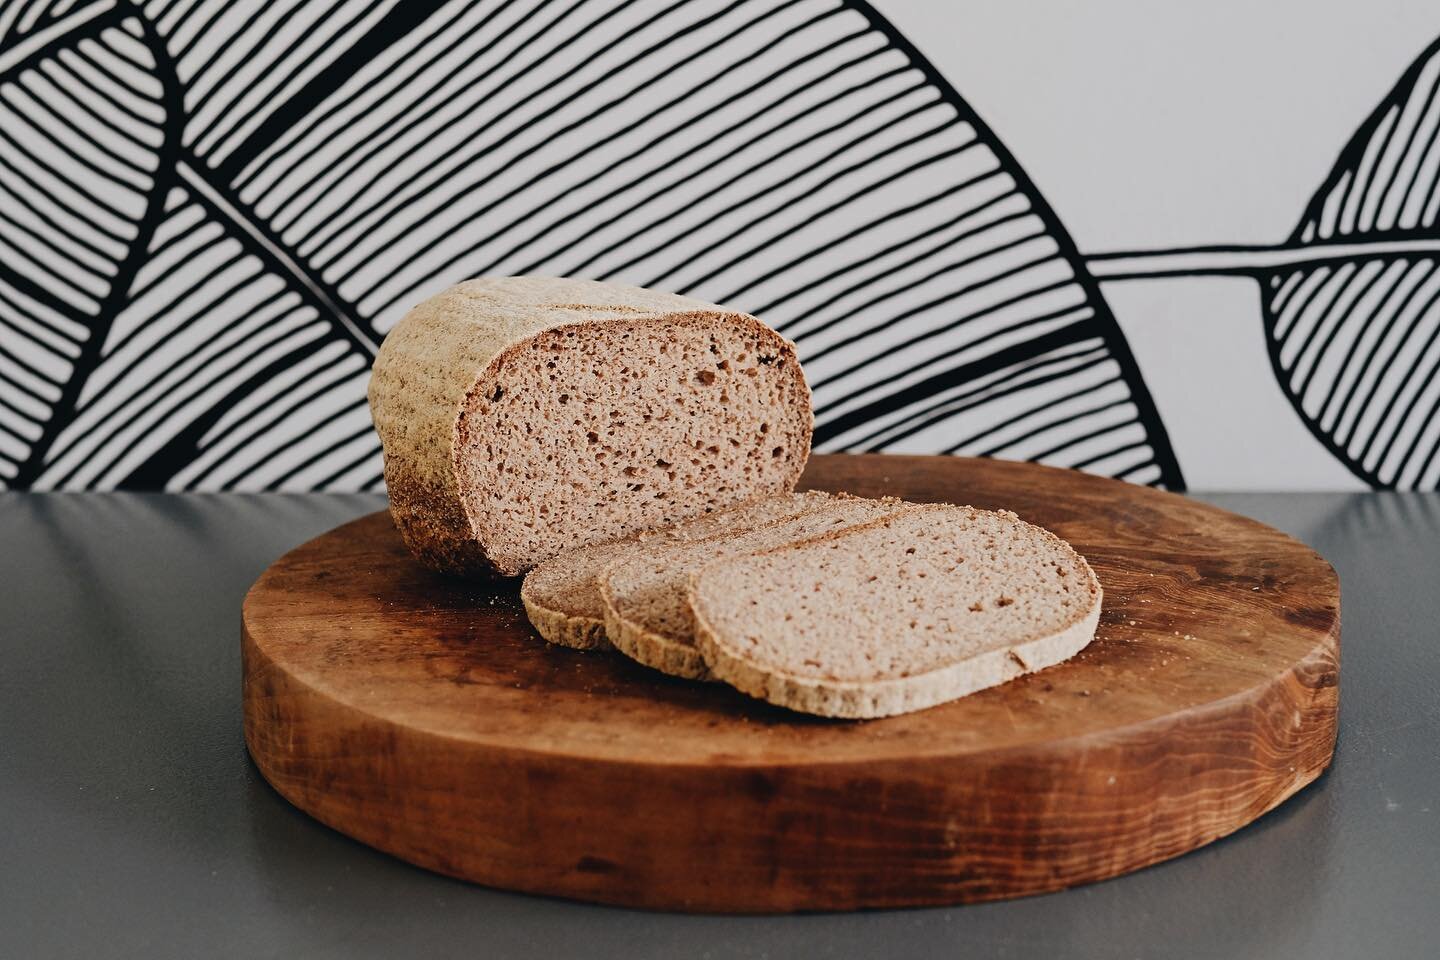 Our gluten free sourdough is baked fermented goodness. Made with freshly milled flours and Chef Victoria&rsquo;s rice flour mother starter, this bread is delicious with just about anything. Today we&rsquo;re having it with our classic ham and pea sou